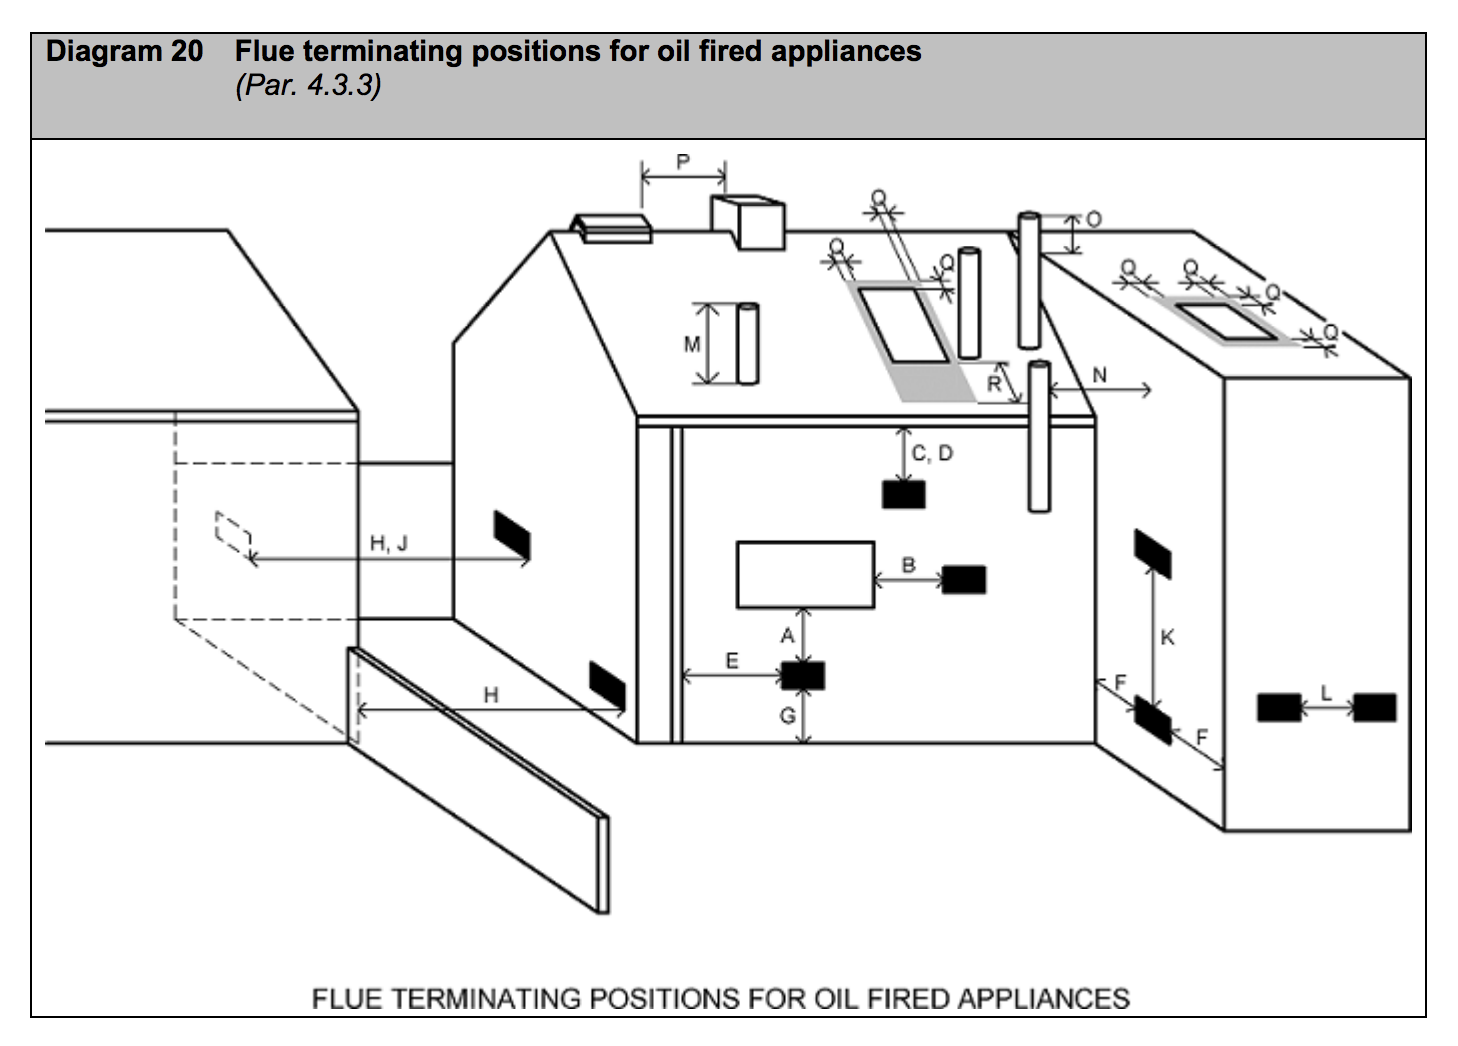 Diagram HJ20 - Flue terminating positions for oil fired appliances - Extract from TGD J